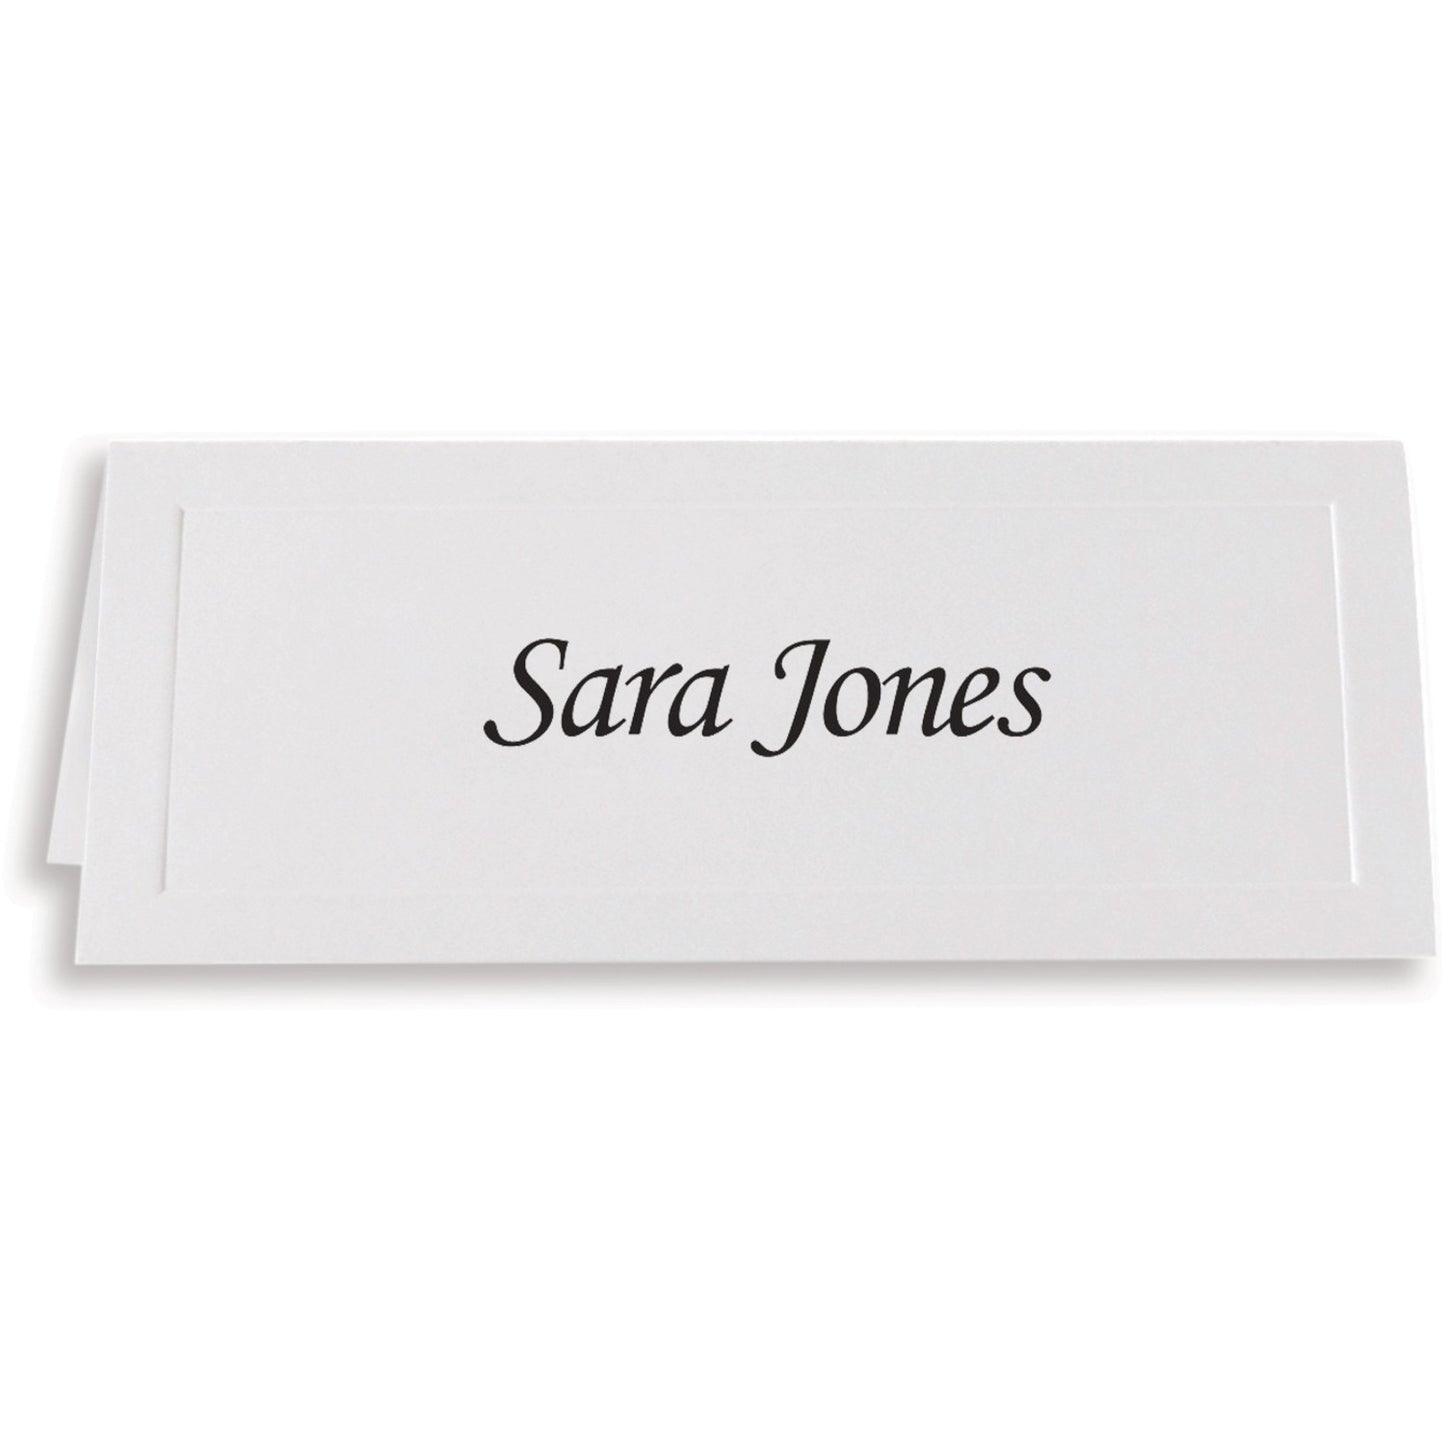 First Base Overtures Embossed Tent Card - White - Recycled